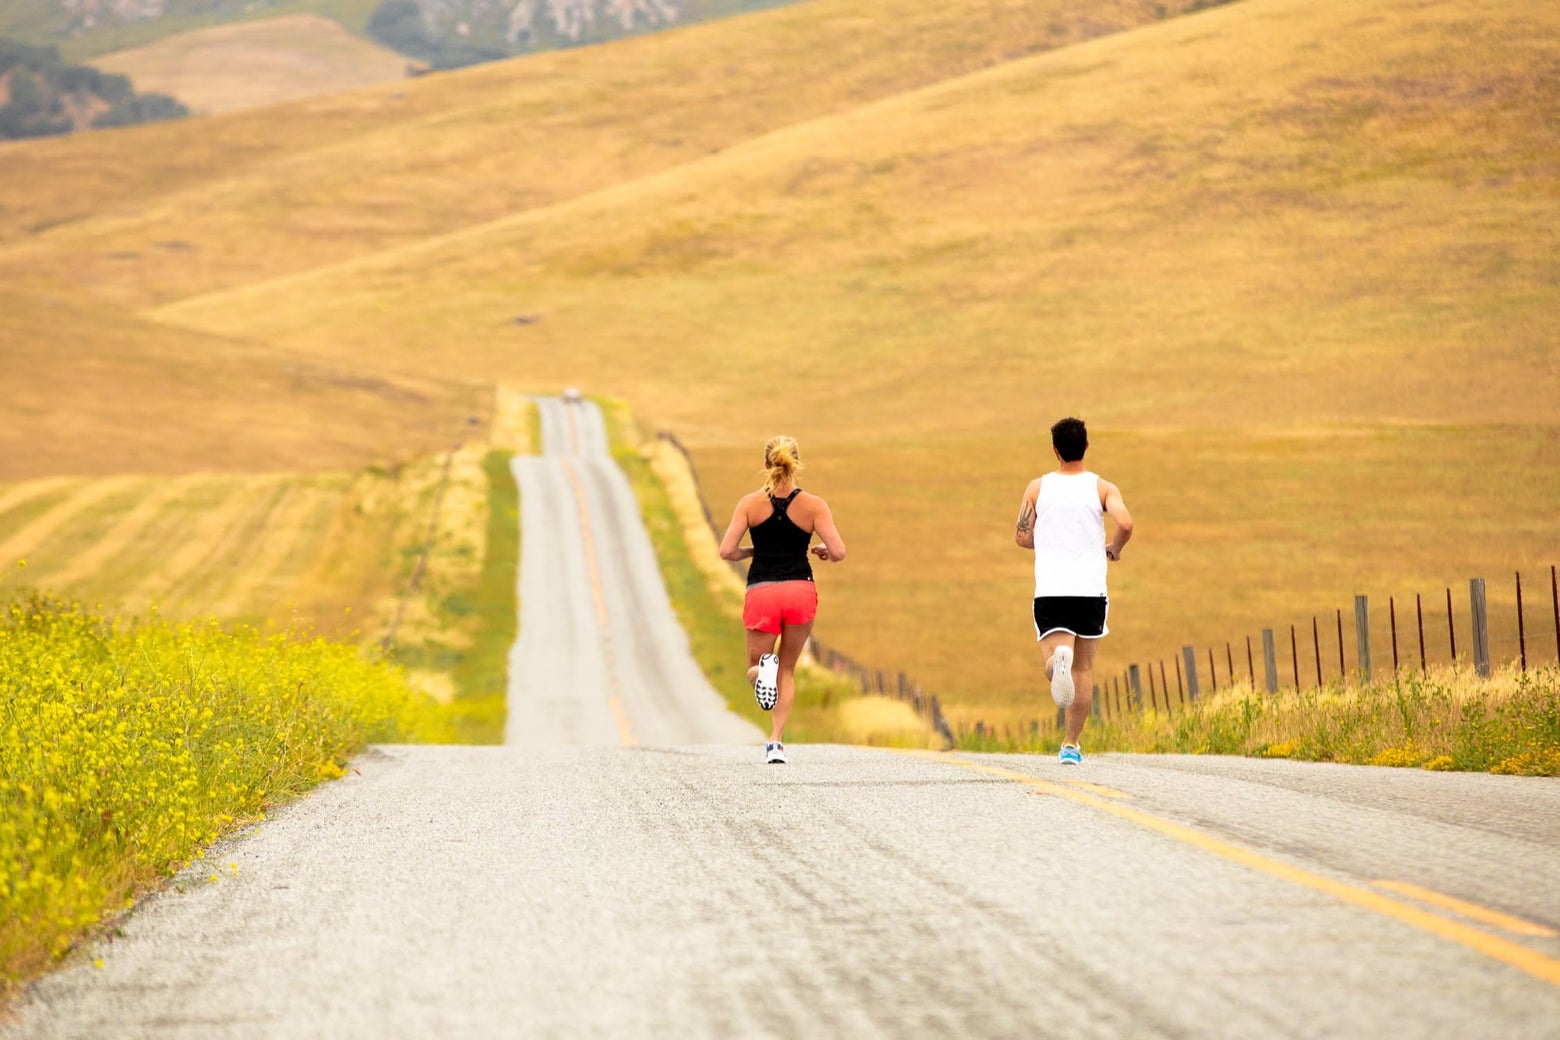 Man and woman running on an open road